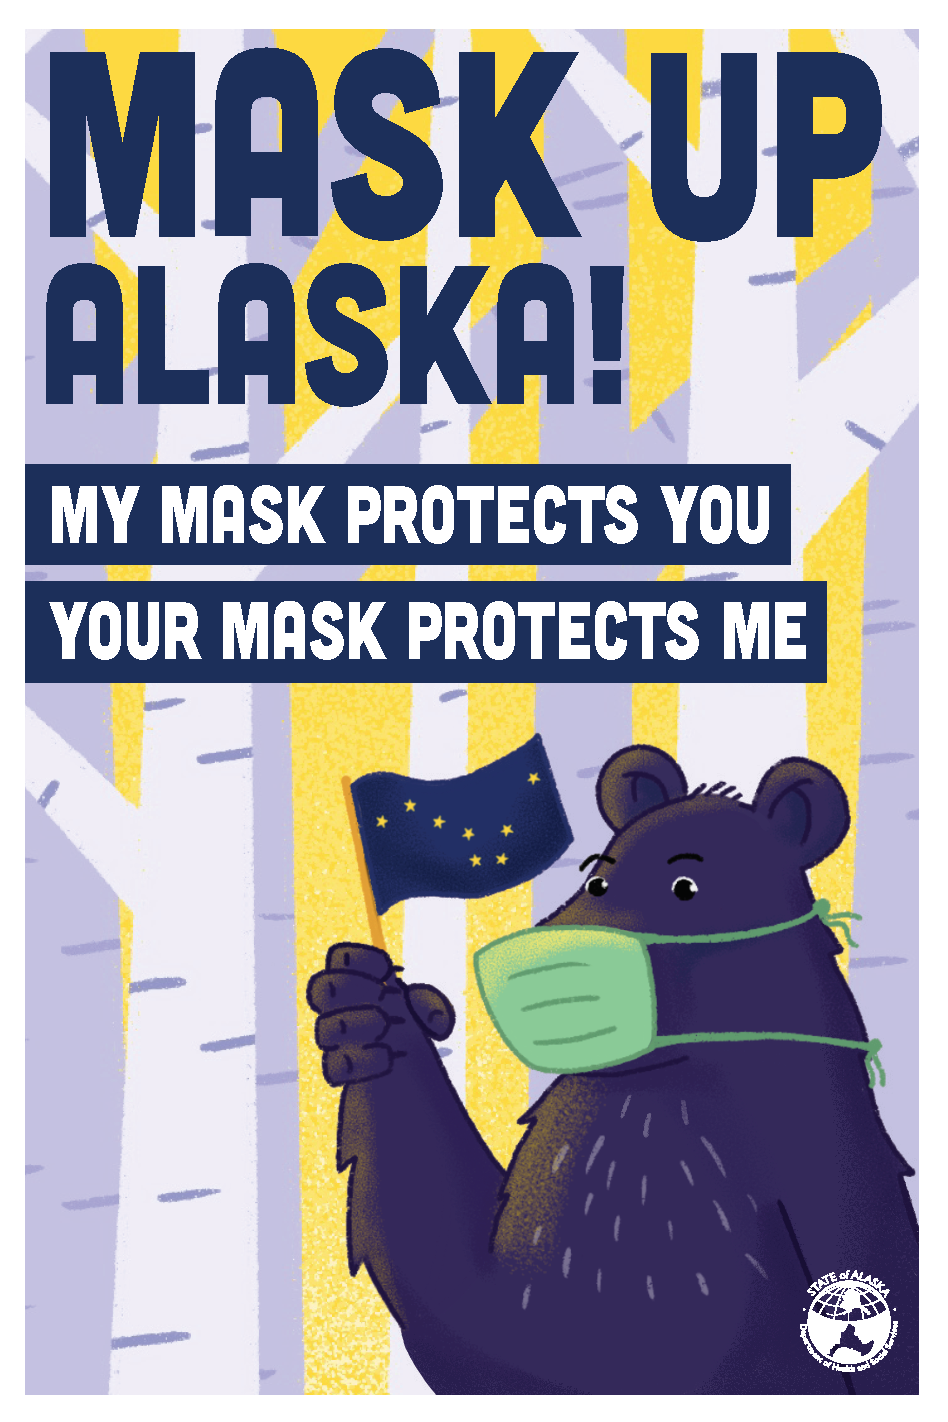 Mask up, Alaska! My mask protects you, your mask protects me